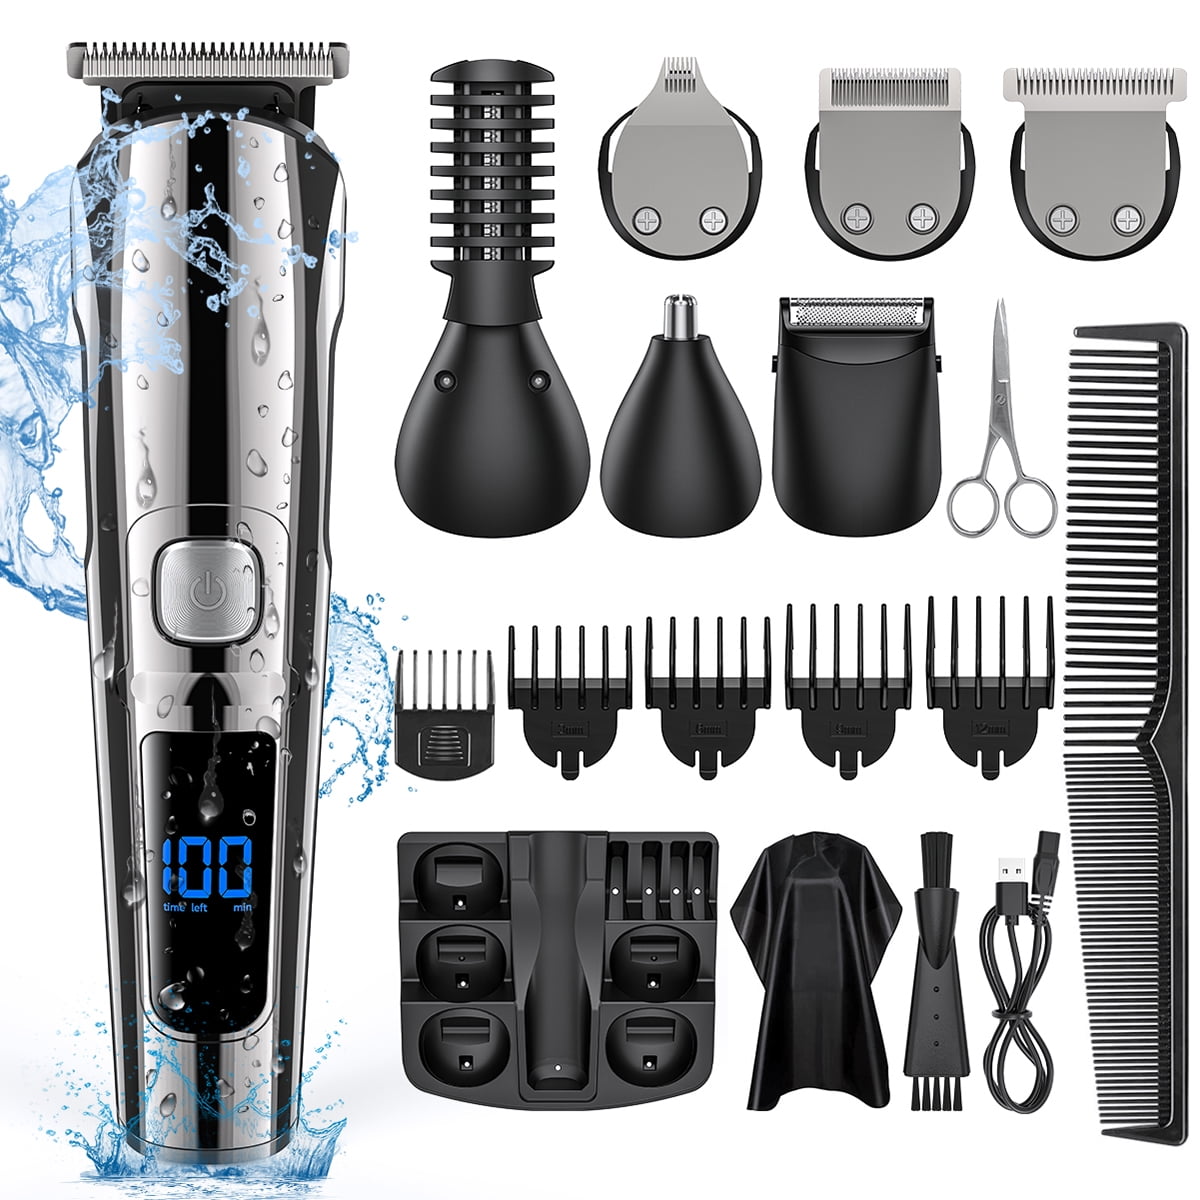 15 in 1 Hair Clippers, IPX7 Hair Beard Trimmer USB Rechargeable Male  Cordless Haircut Groomer Kit 